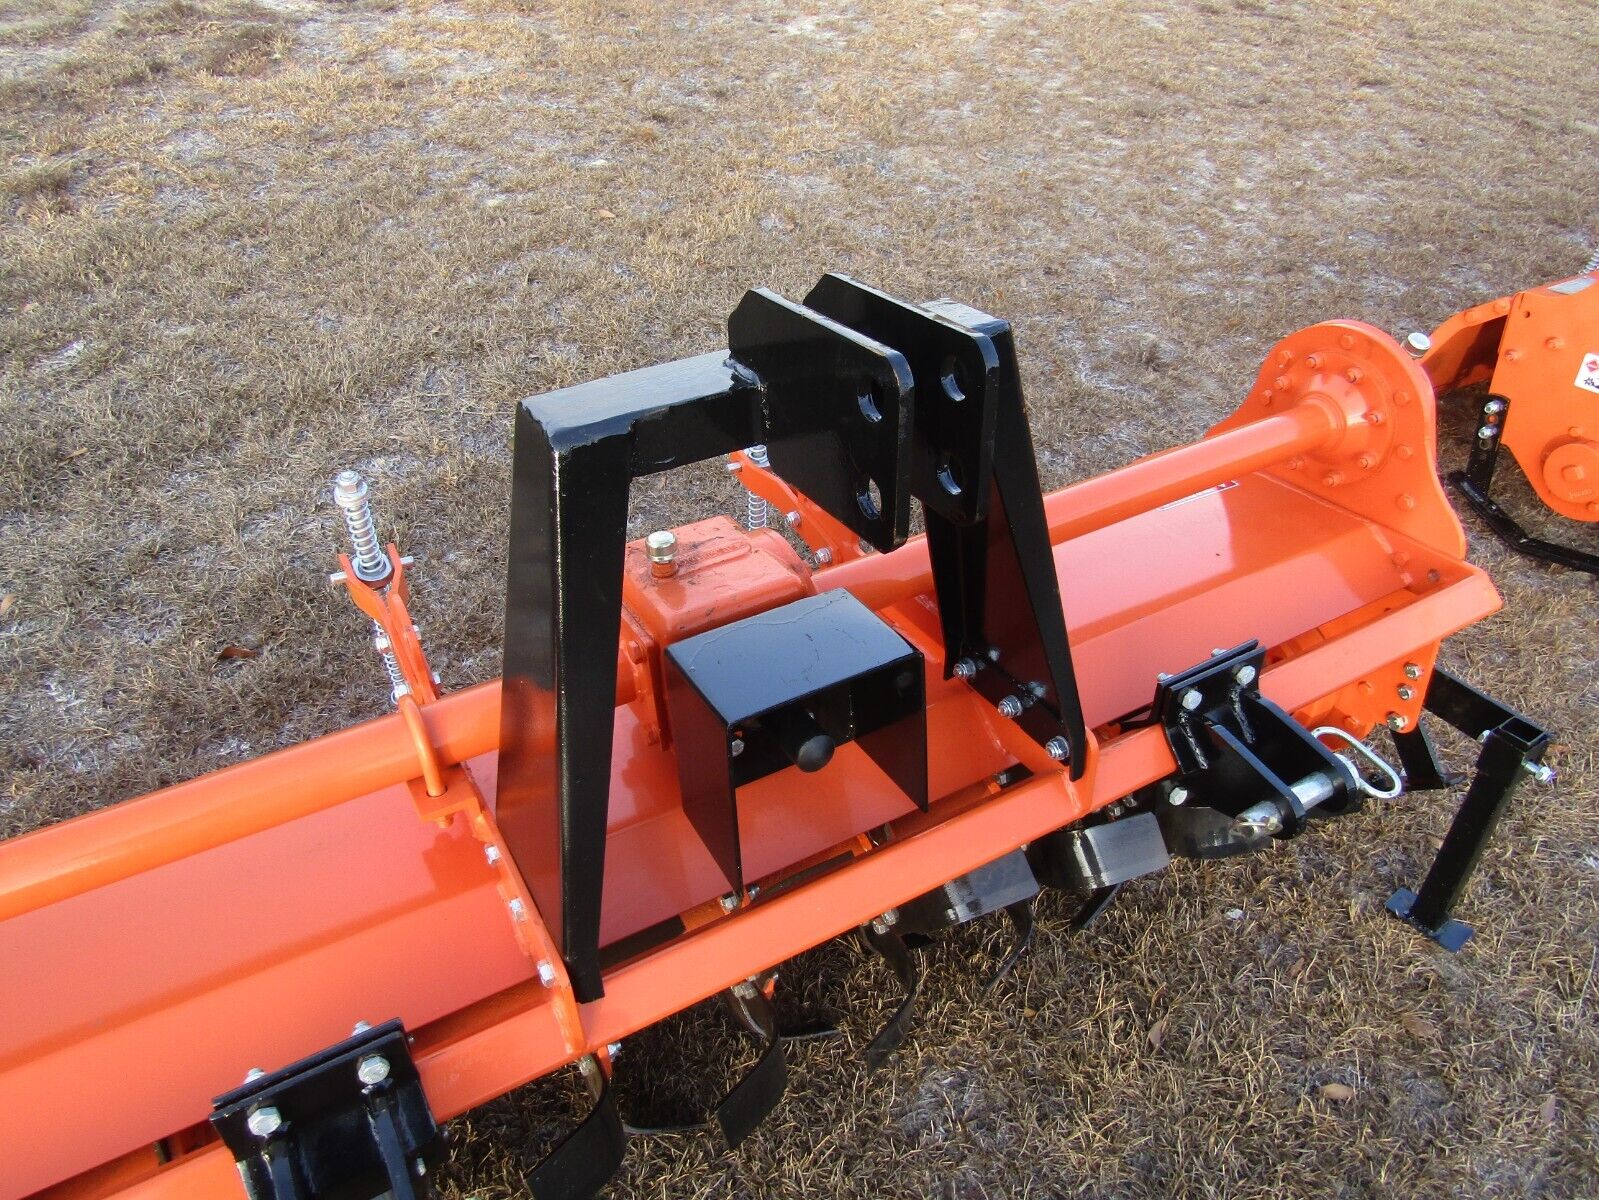 72" Rotary Tiller, HD Gear drive (no chain), slip clutch pto, all welded A-Frame